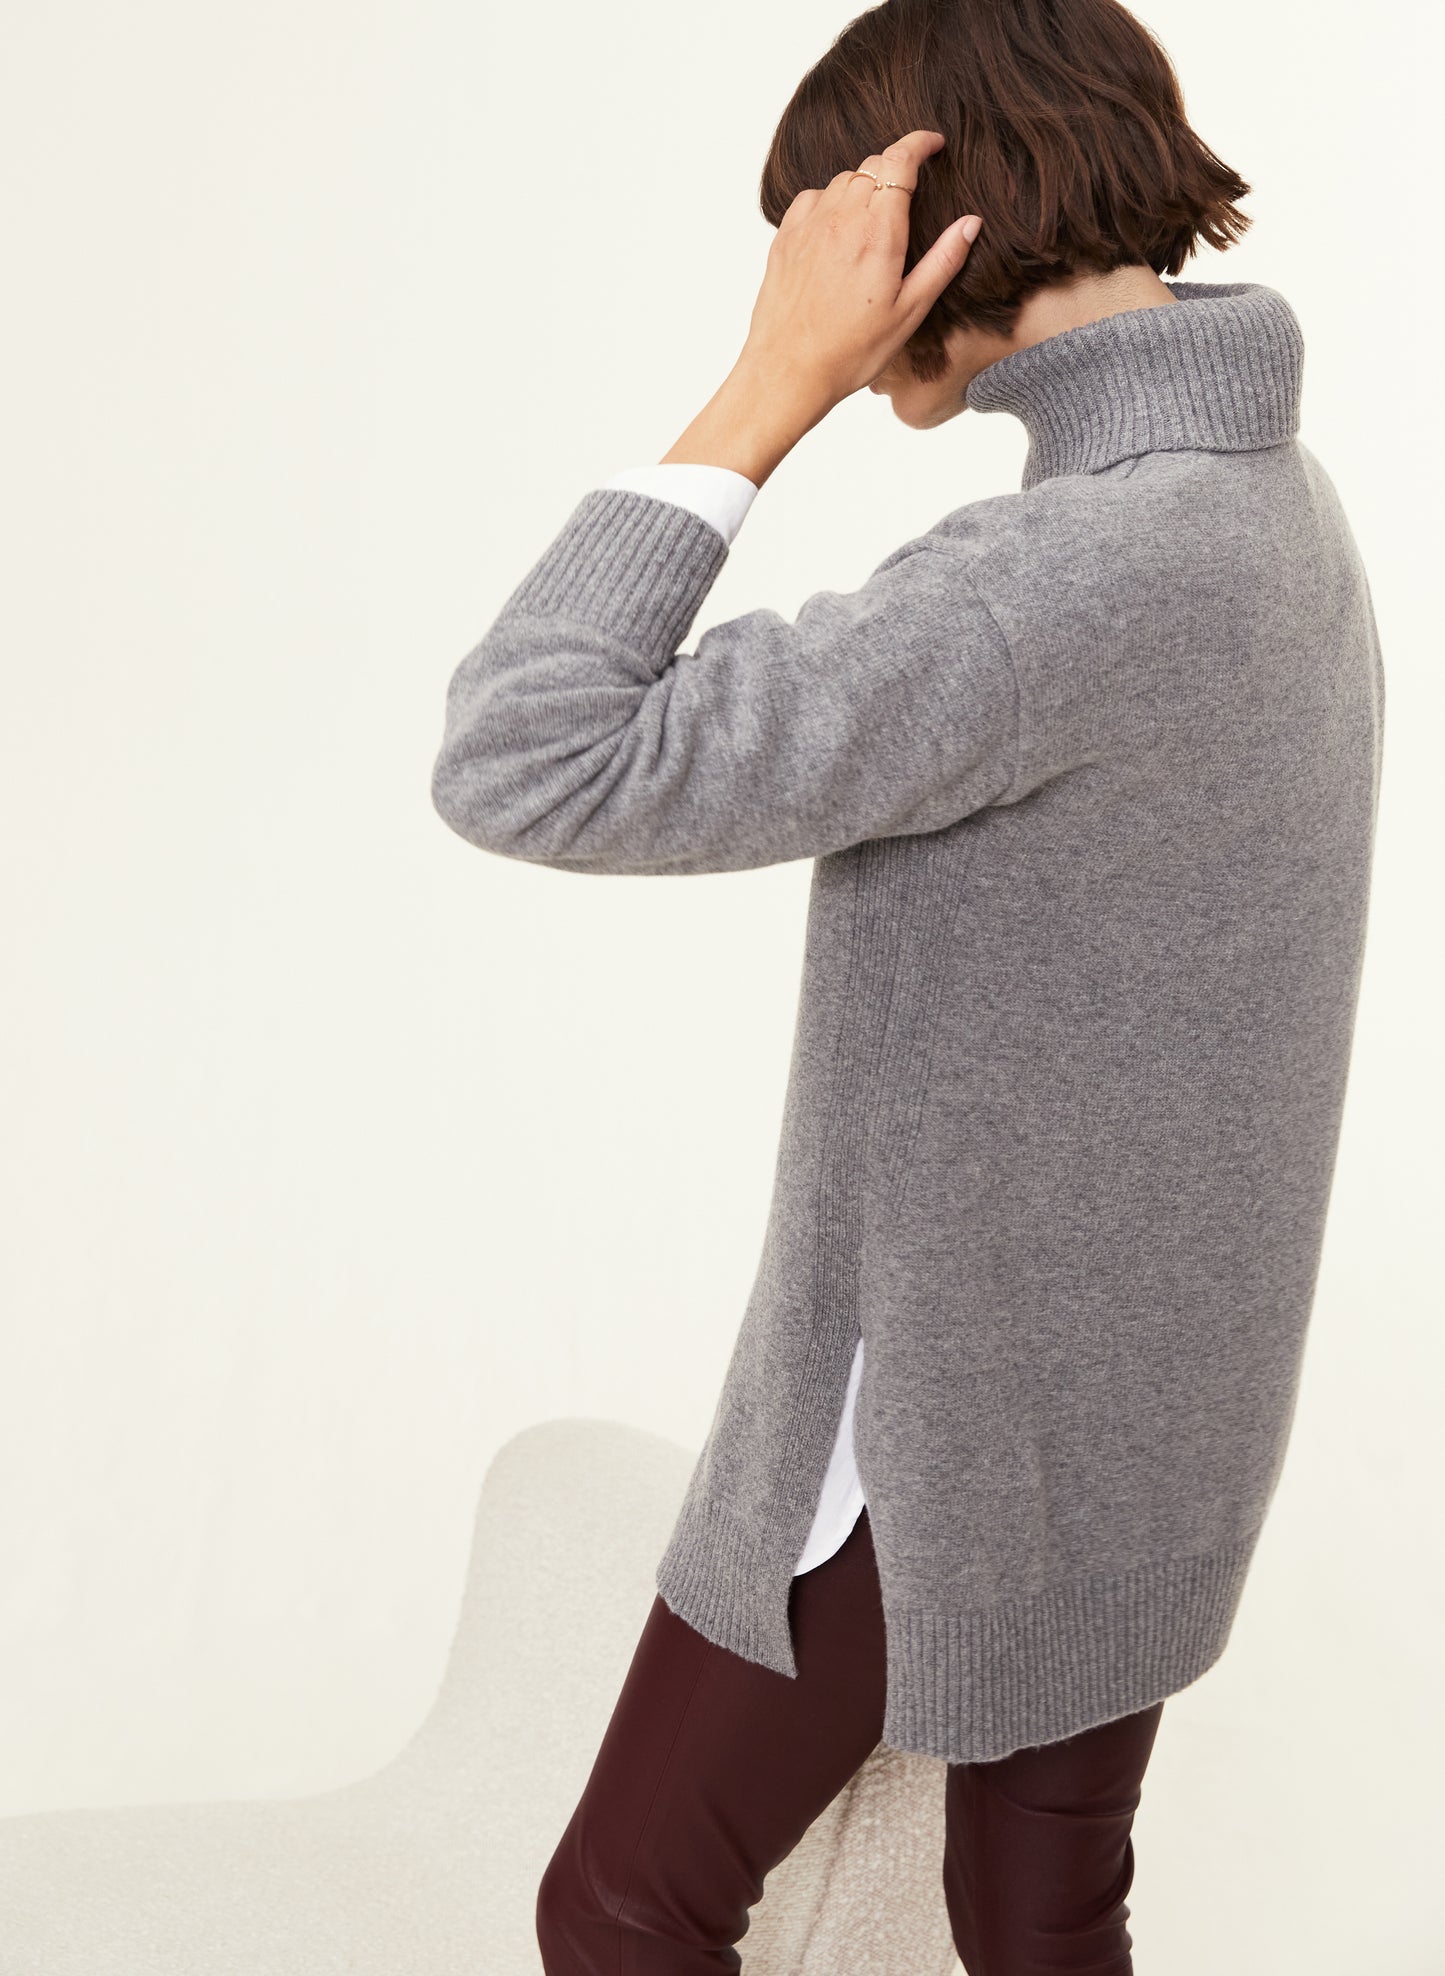 Asher Recycled Wool Blend Jumper